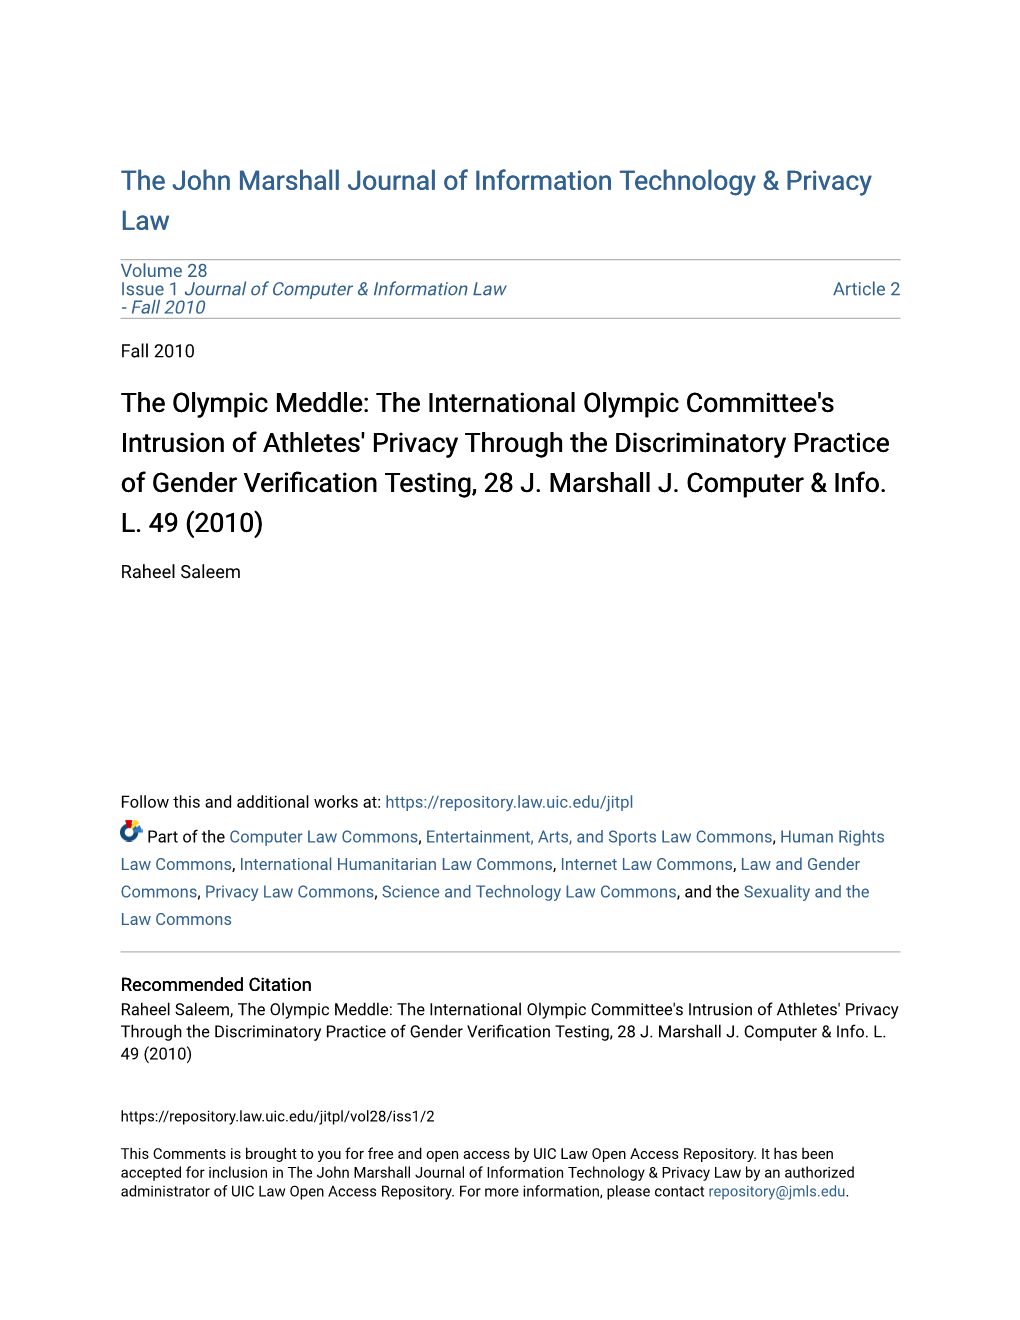 The International Olympic Committee's Intrusion of Athletes' Privacy Through the Discriminatory Practice of Gender Verification Esting,T 28 J